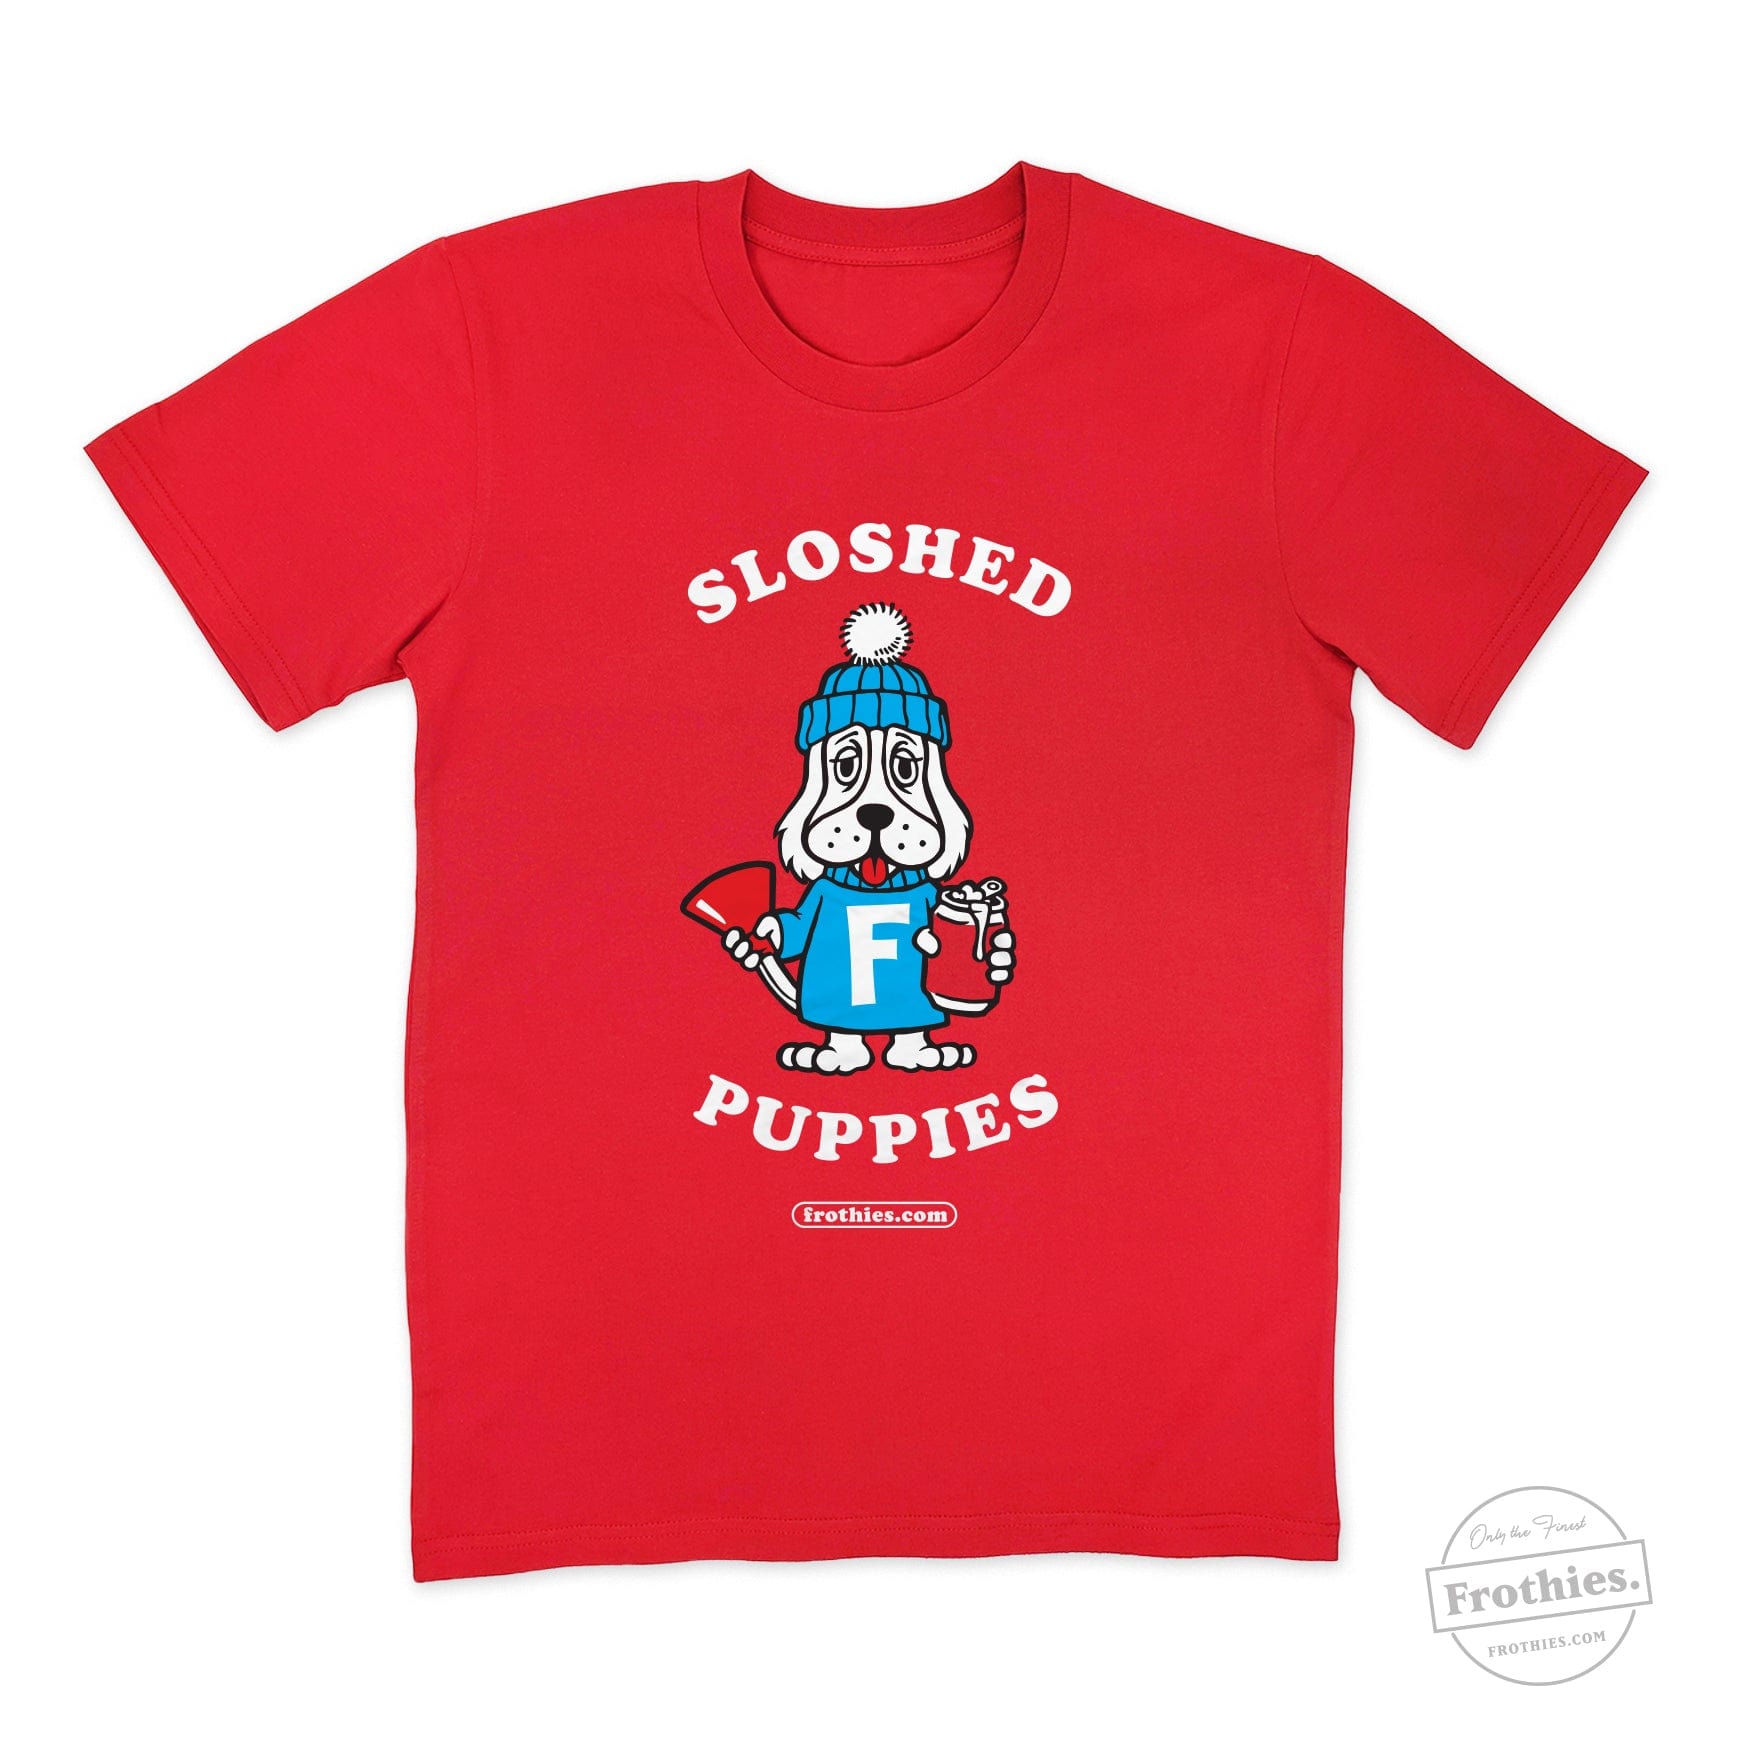 Sloshed Puppies Tee T-Shirt Frothies